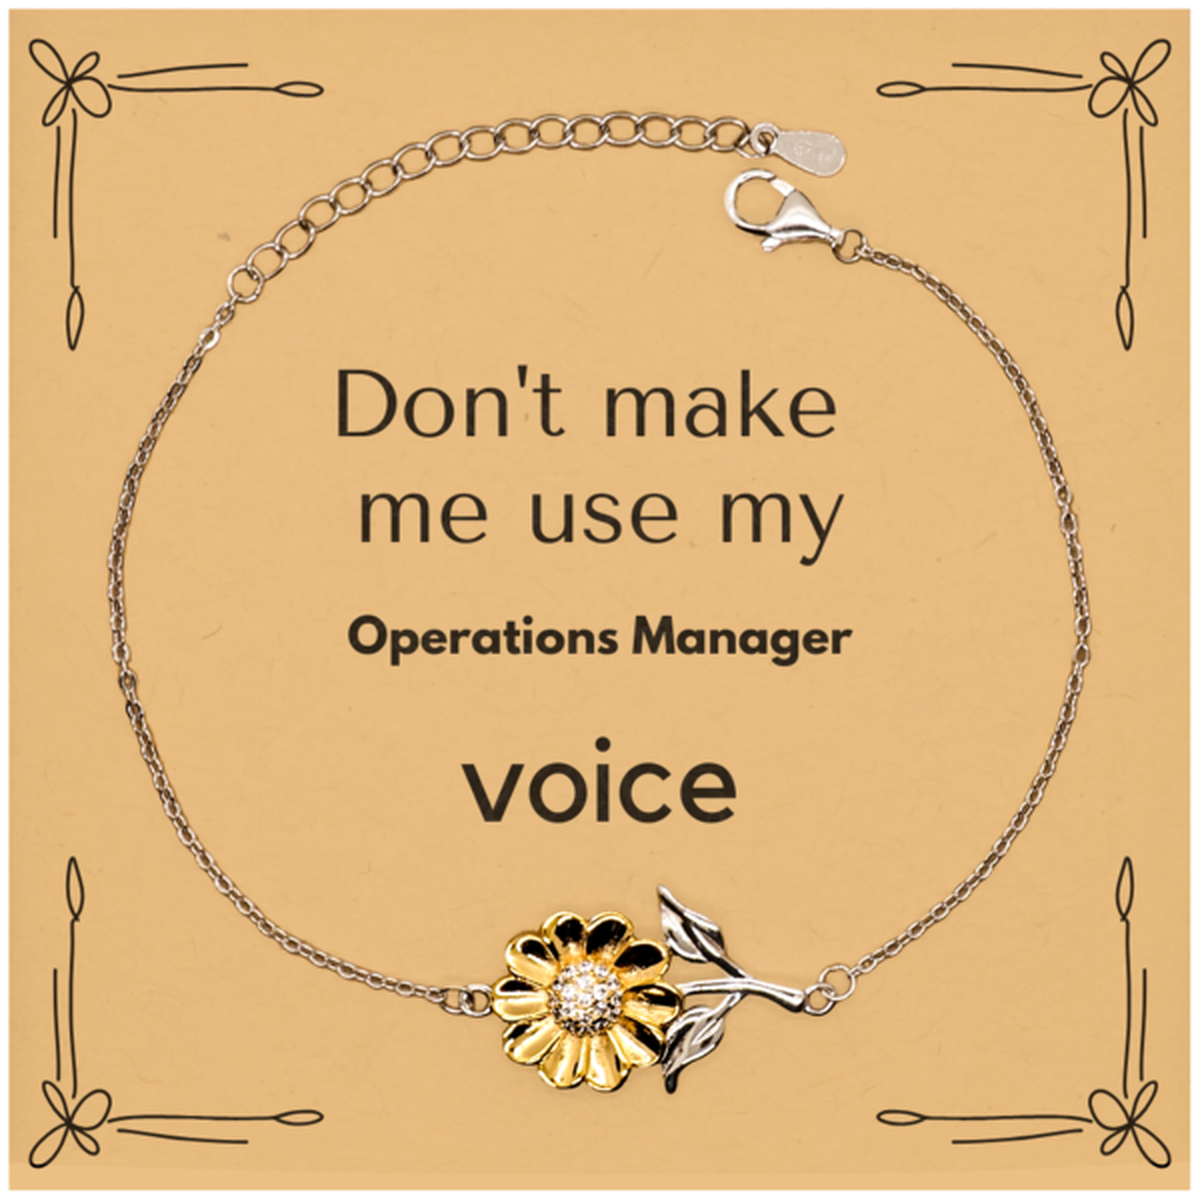 Don't make me use my Operations Manager voice, Sarcasm Operations Manager Card Gifts, Christmas Operations Manager Sunflower Bracelet Birthday Unique Gifts For Operations Manager Coworkers, Men, Women, Colleague, Friends